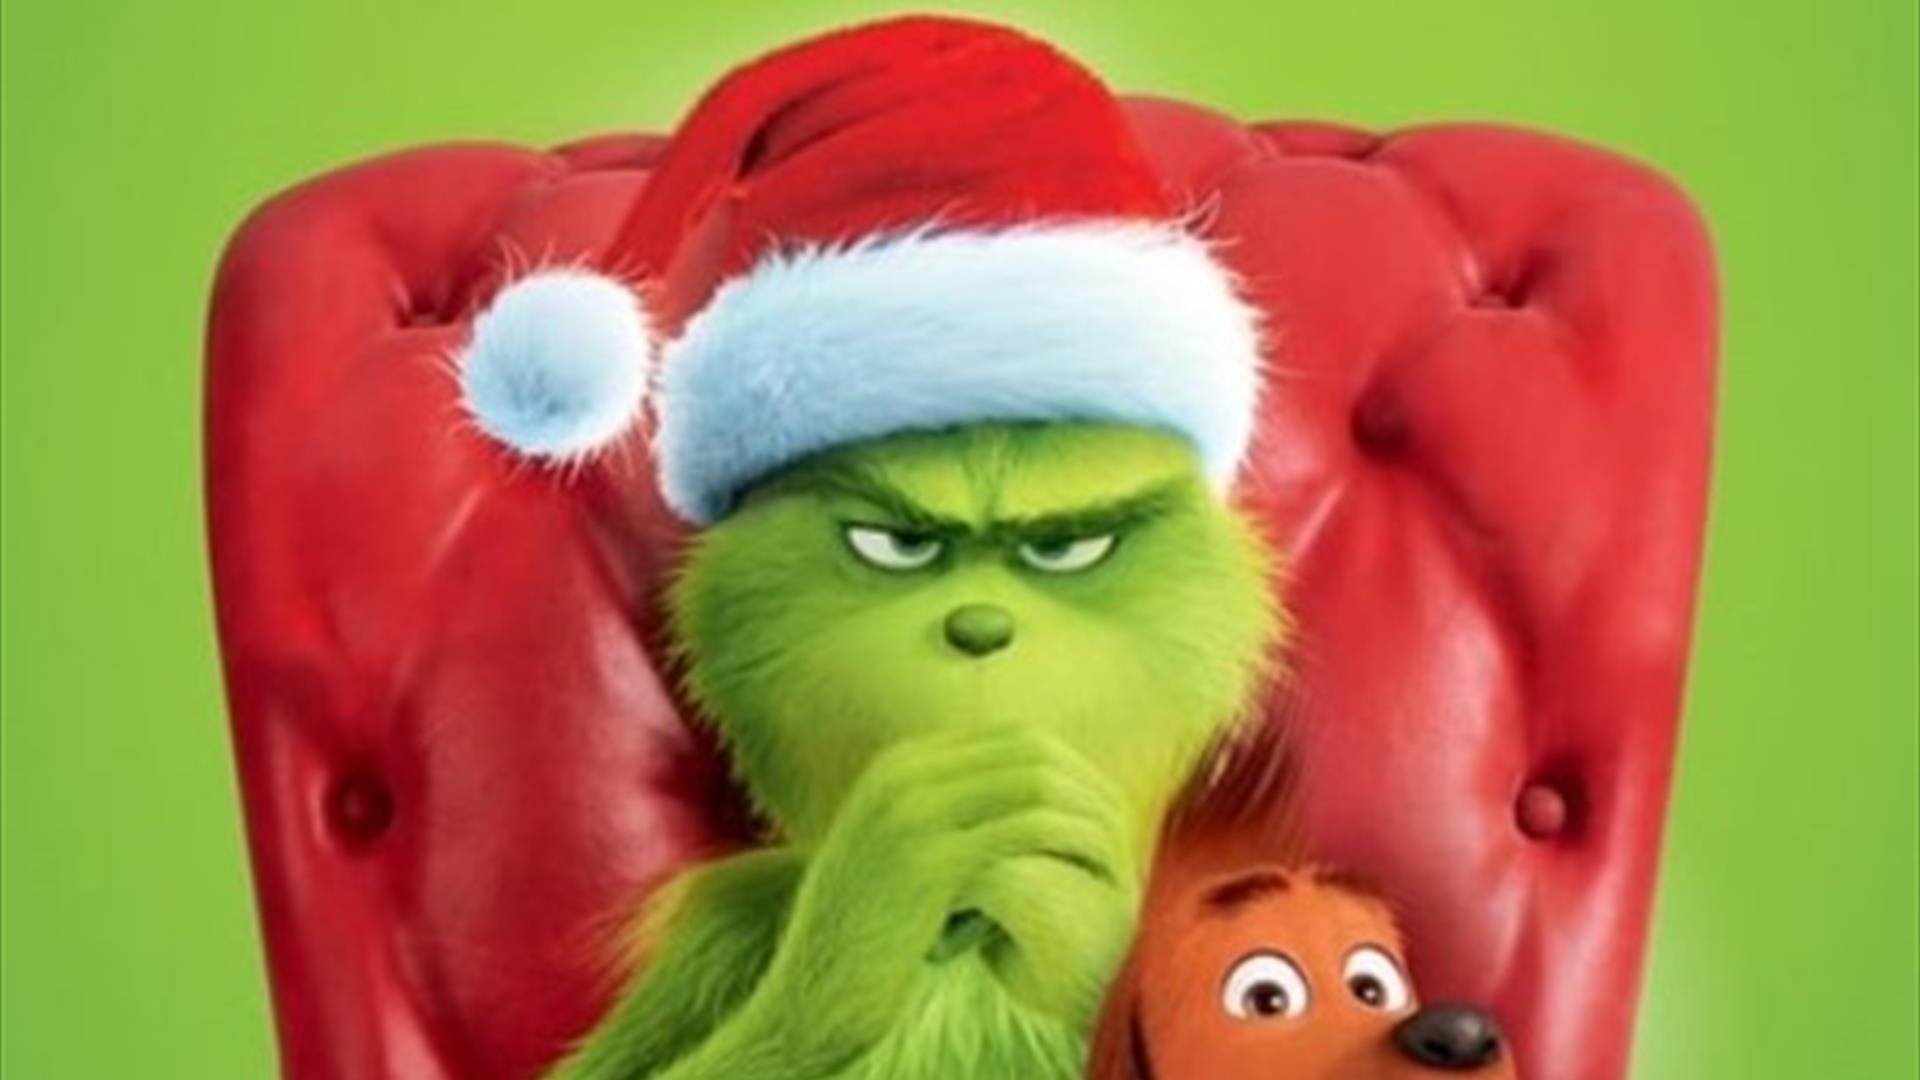 The Grinch